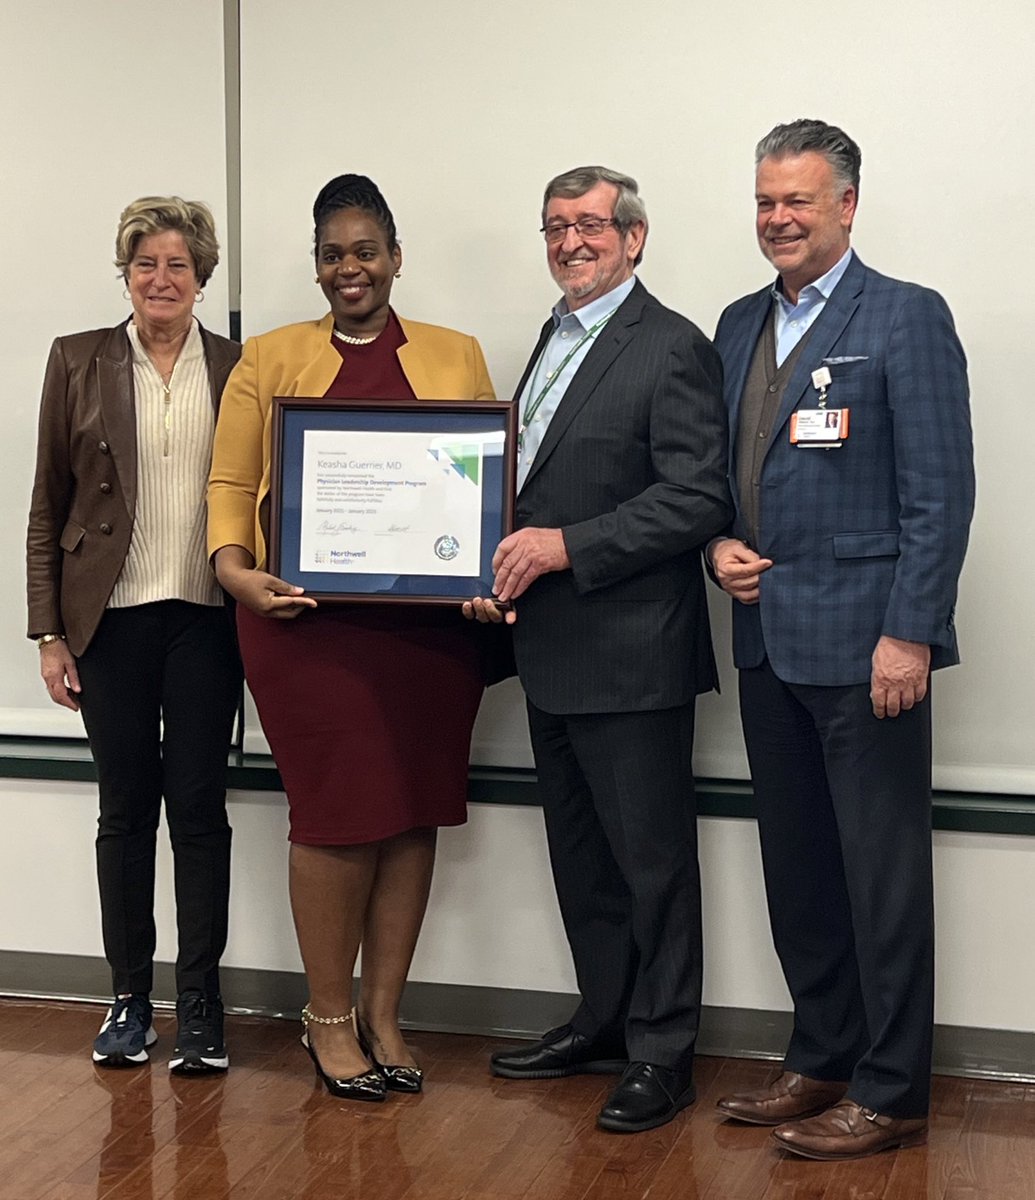 Congratulations to our own director of quality leadership & advocacy @shindanaa (DrKeashaGuerrierBryant) on her completion of the @NorthwellHealth #PhysicianLeadership Devpt Program! #FamilyMedicine @ZuckerSoM @NYSAFP